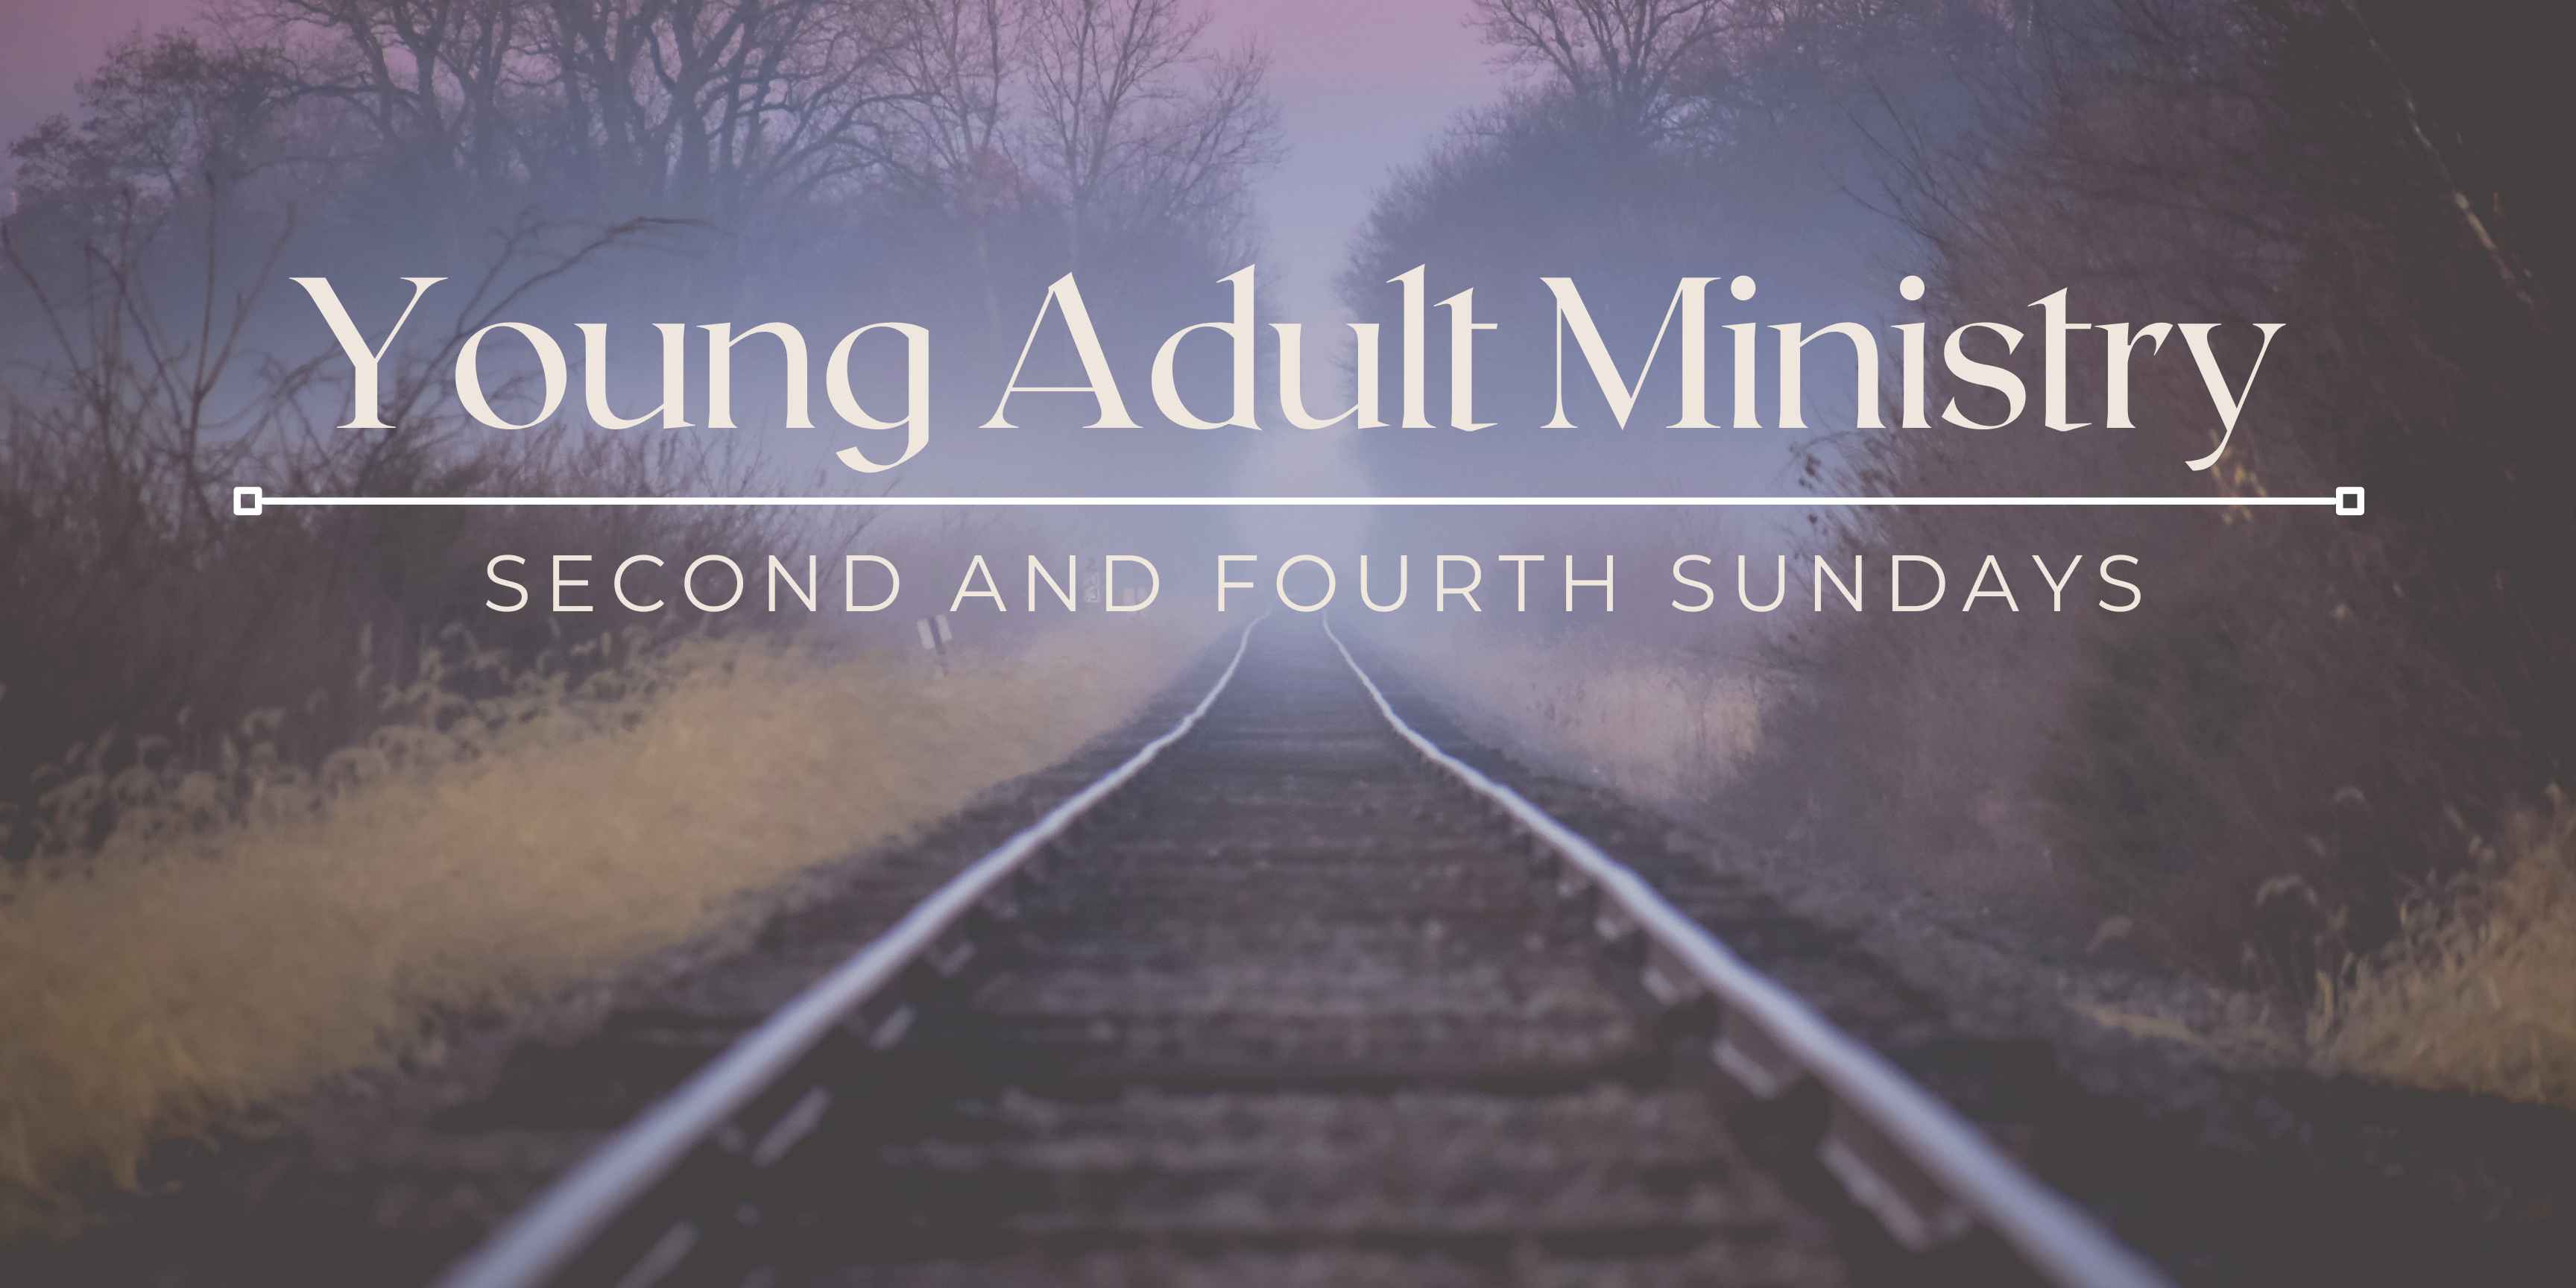 Young Adult Ministry image